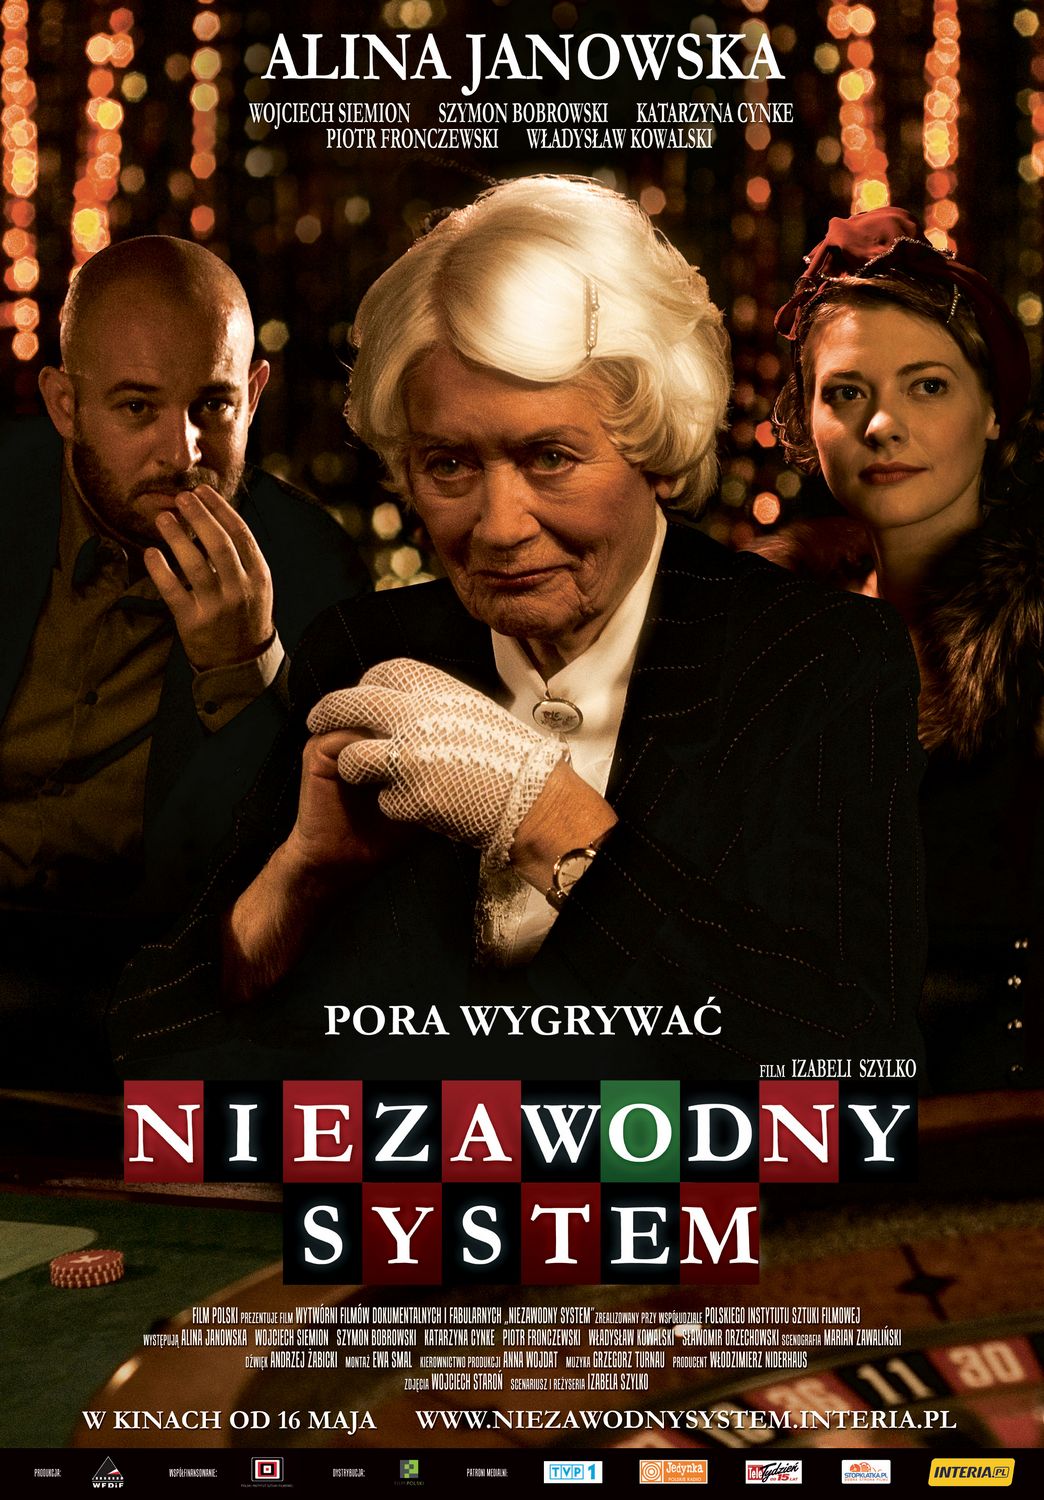 Extra Large Movie Poster Image for Niezawodny system 